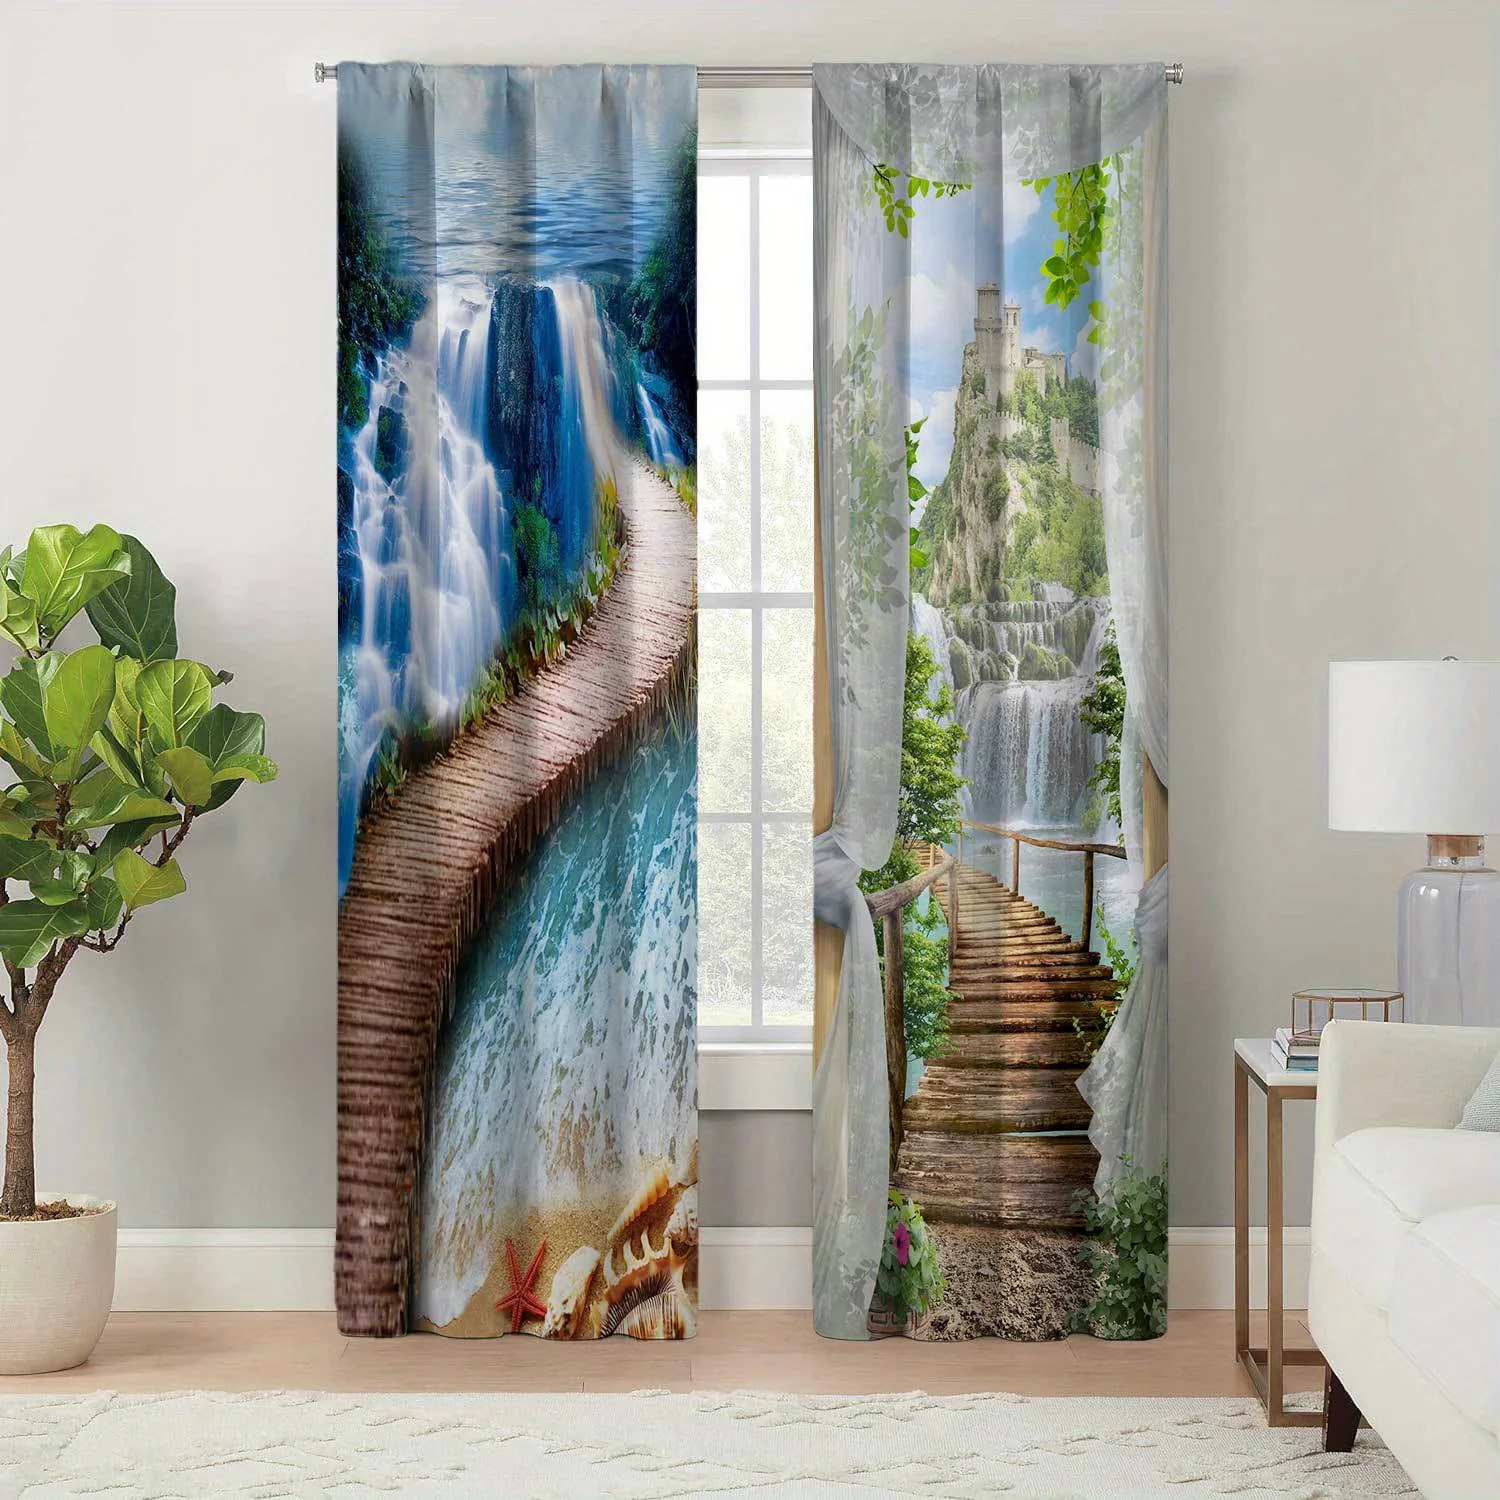 

2panels Minimalist Style Living Room Curtain Window Landscape Printed Curtains Four Season Charm For Living Bedroom Durable